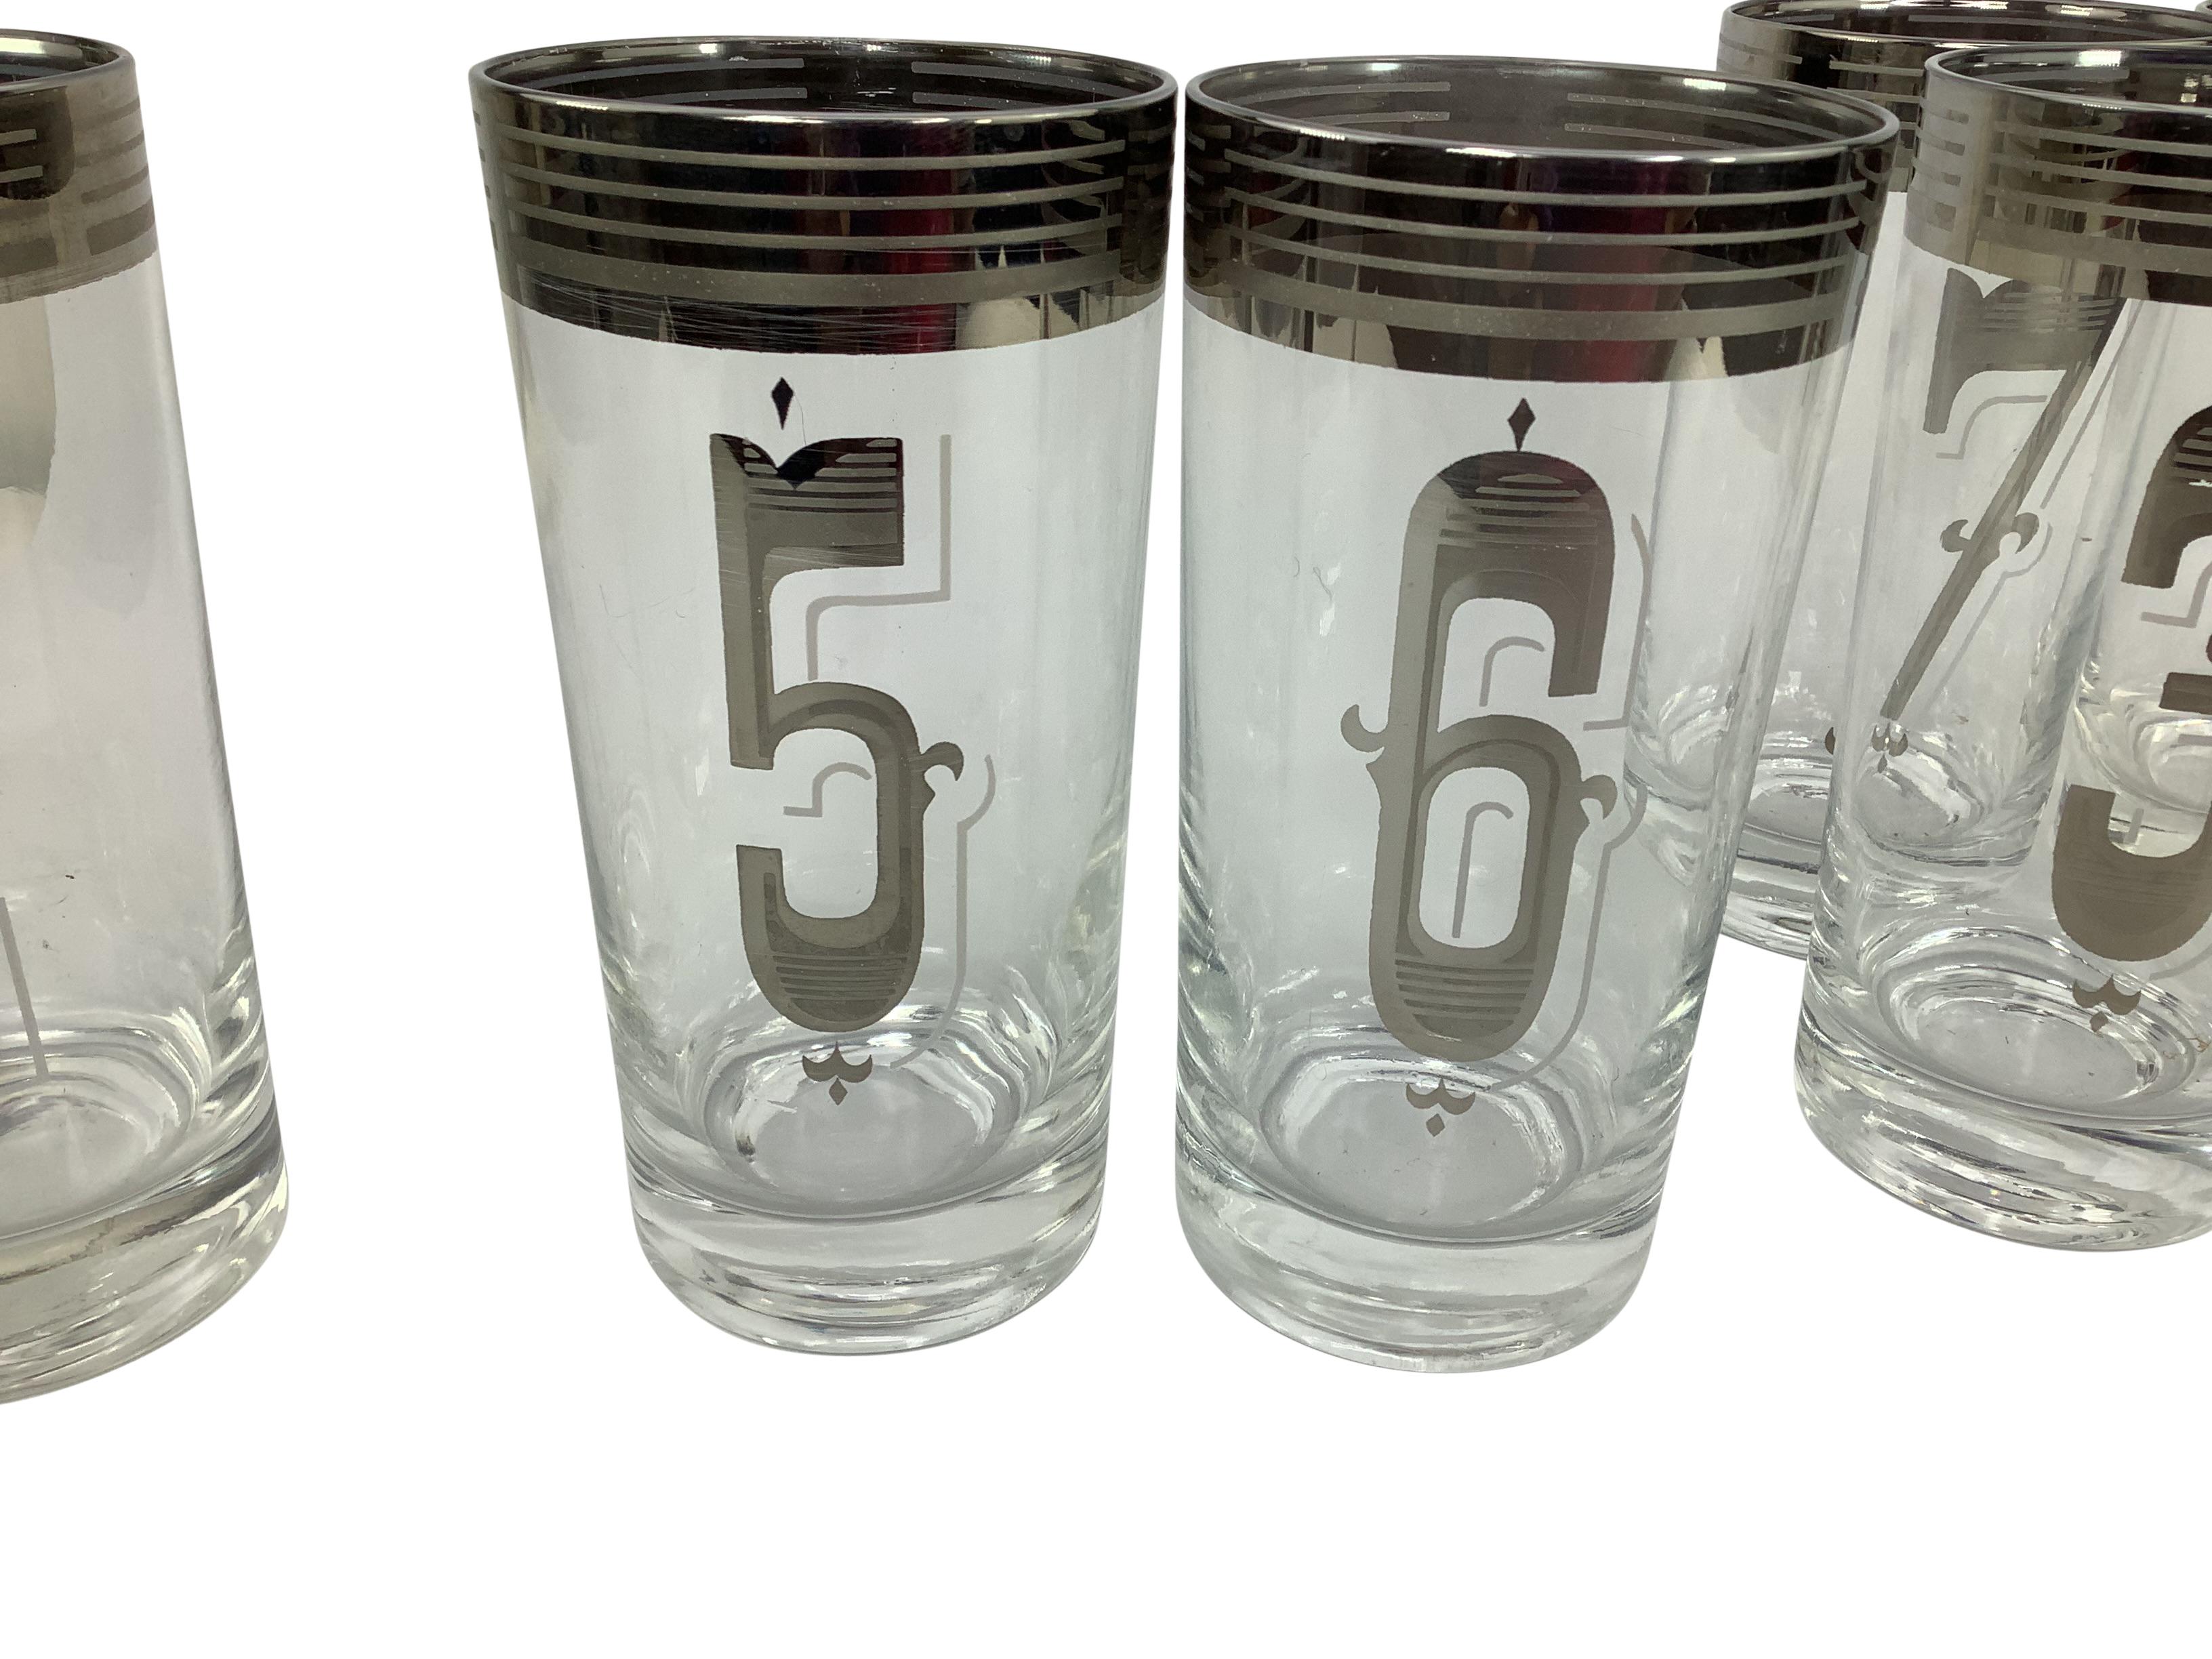 Vintage Drinks by the Numbers Highball Glasses - Set of 8 Numbered Glasses In Good Condition For Sale In Chapel Hill, NC